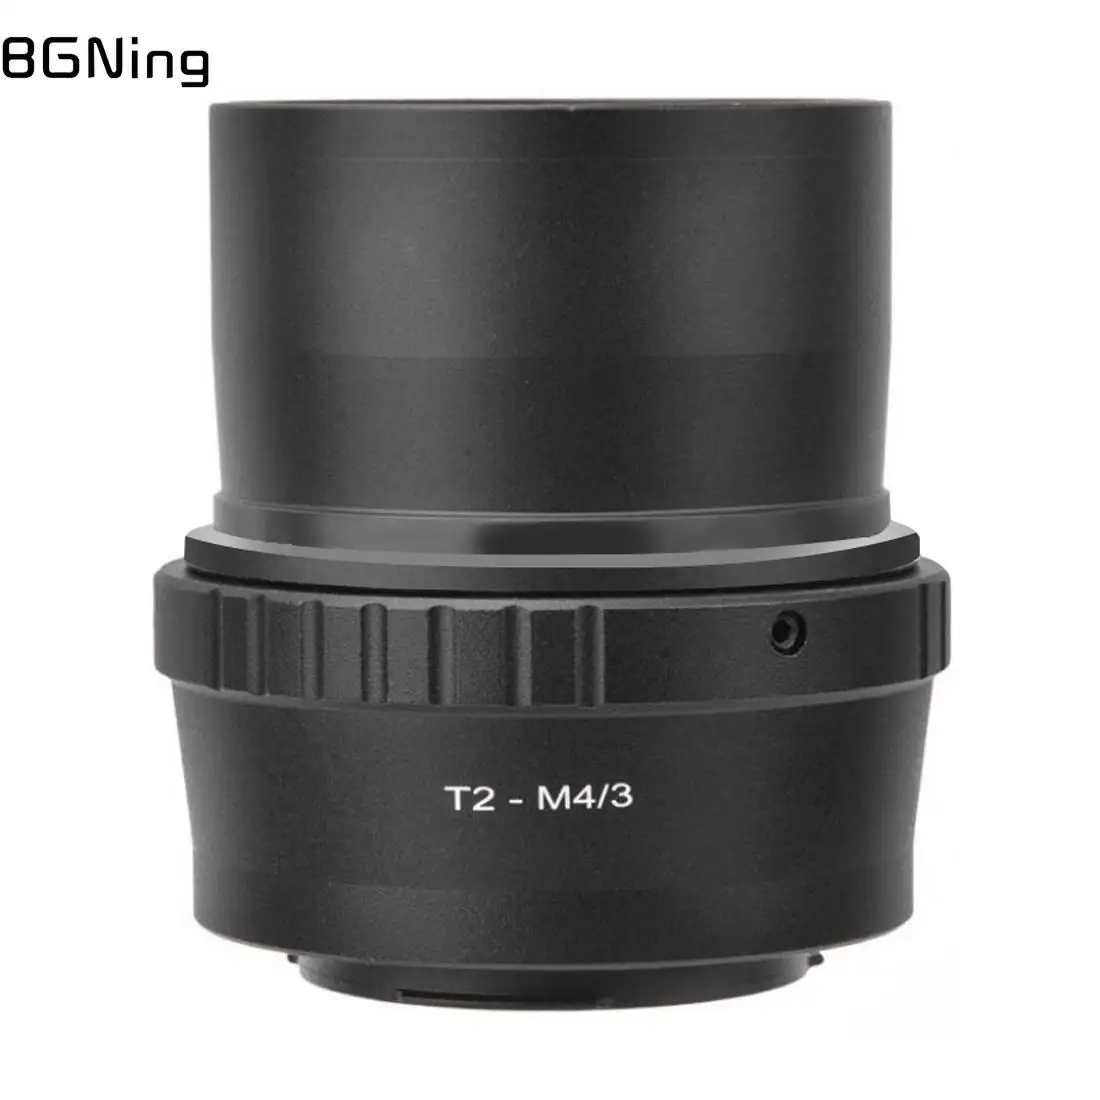 

BGNing 2inch T Mount Telescope Lens 2" to M42 Adapter for Astronomy Telescopes to Mirrorless Camera Photography Accessories